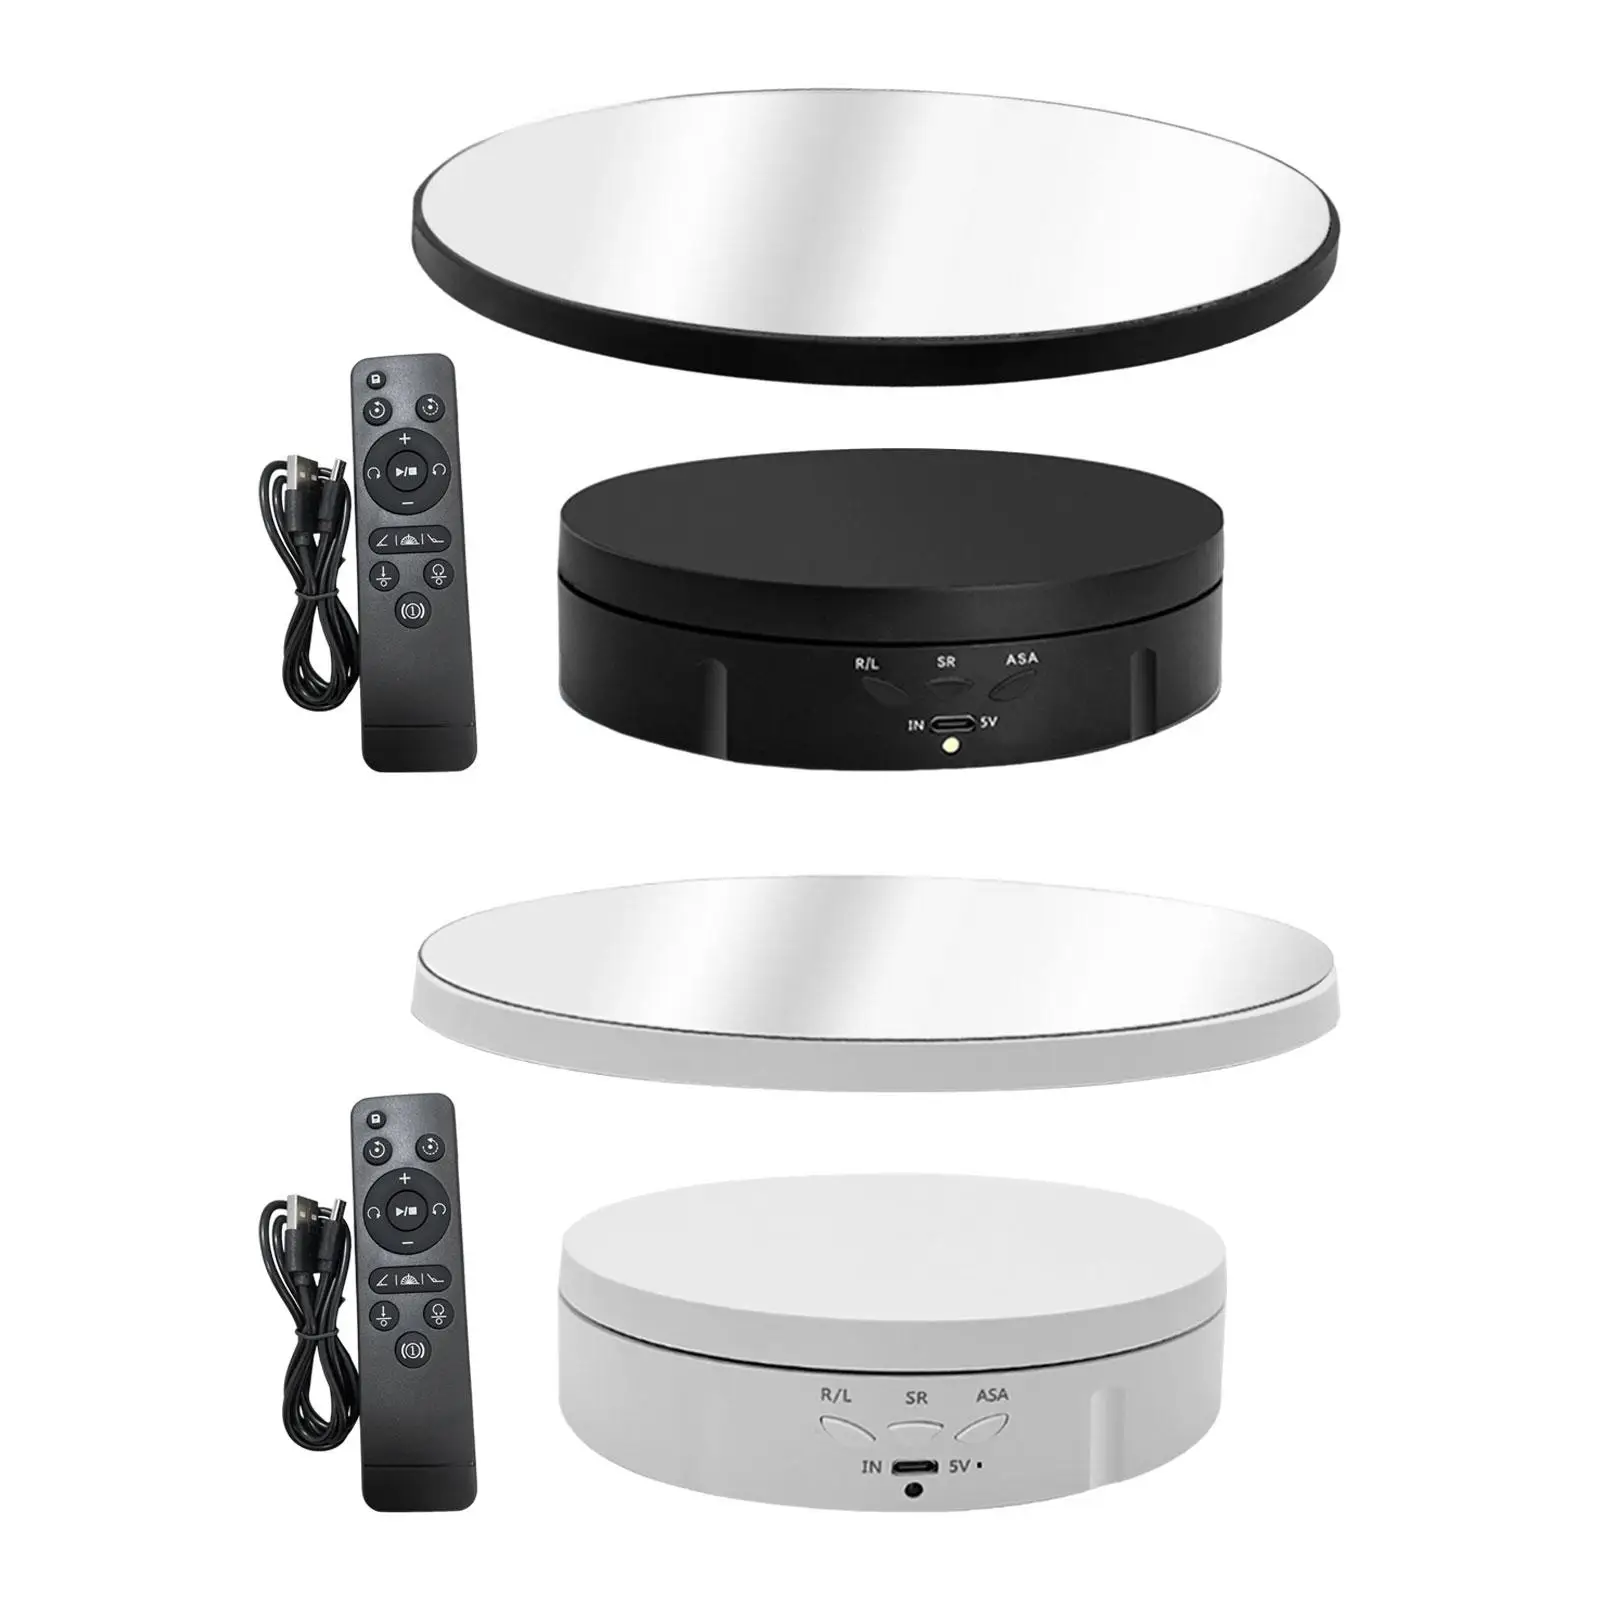 Rotating Display Stand Mirror Covered Automatic Revolving Platform 360 Degree Turntable Display Stand for Cake Model Jewelry